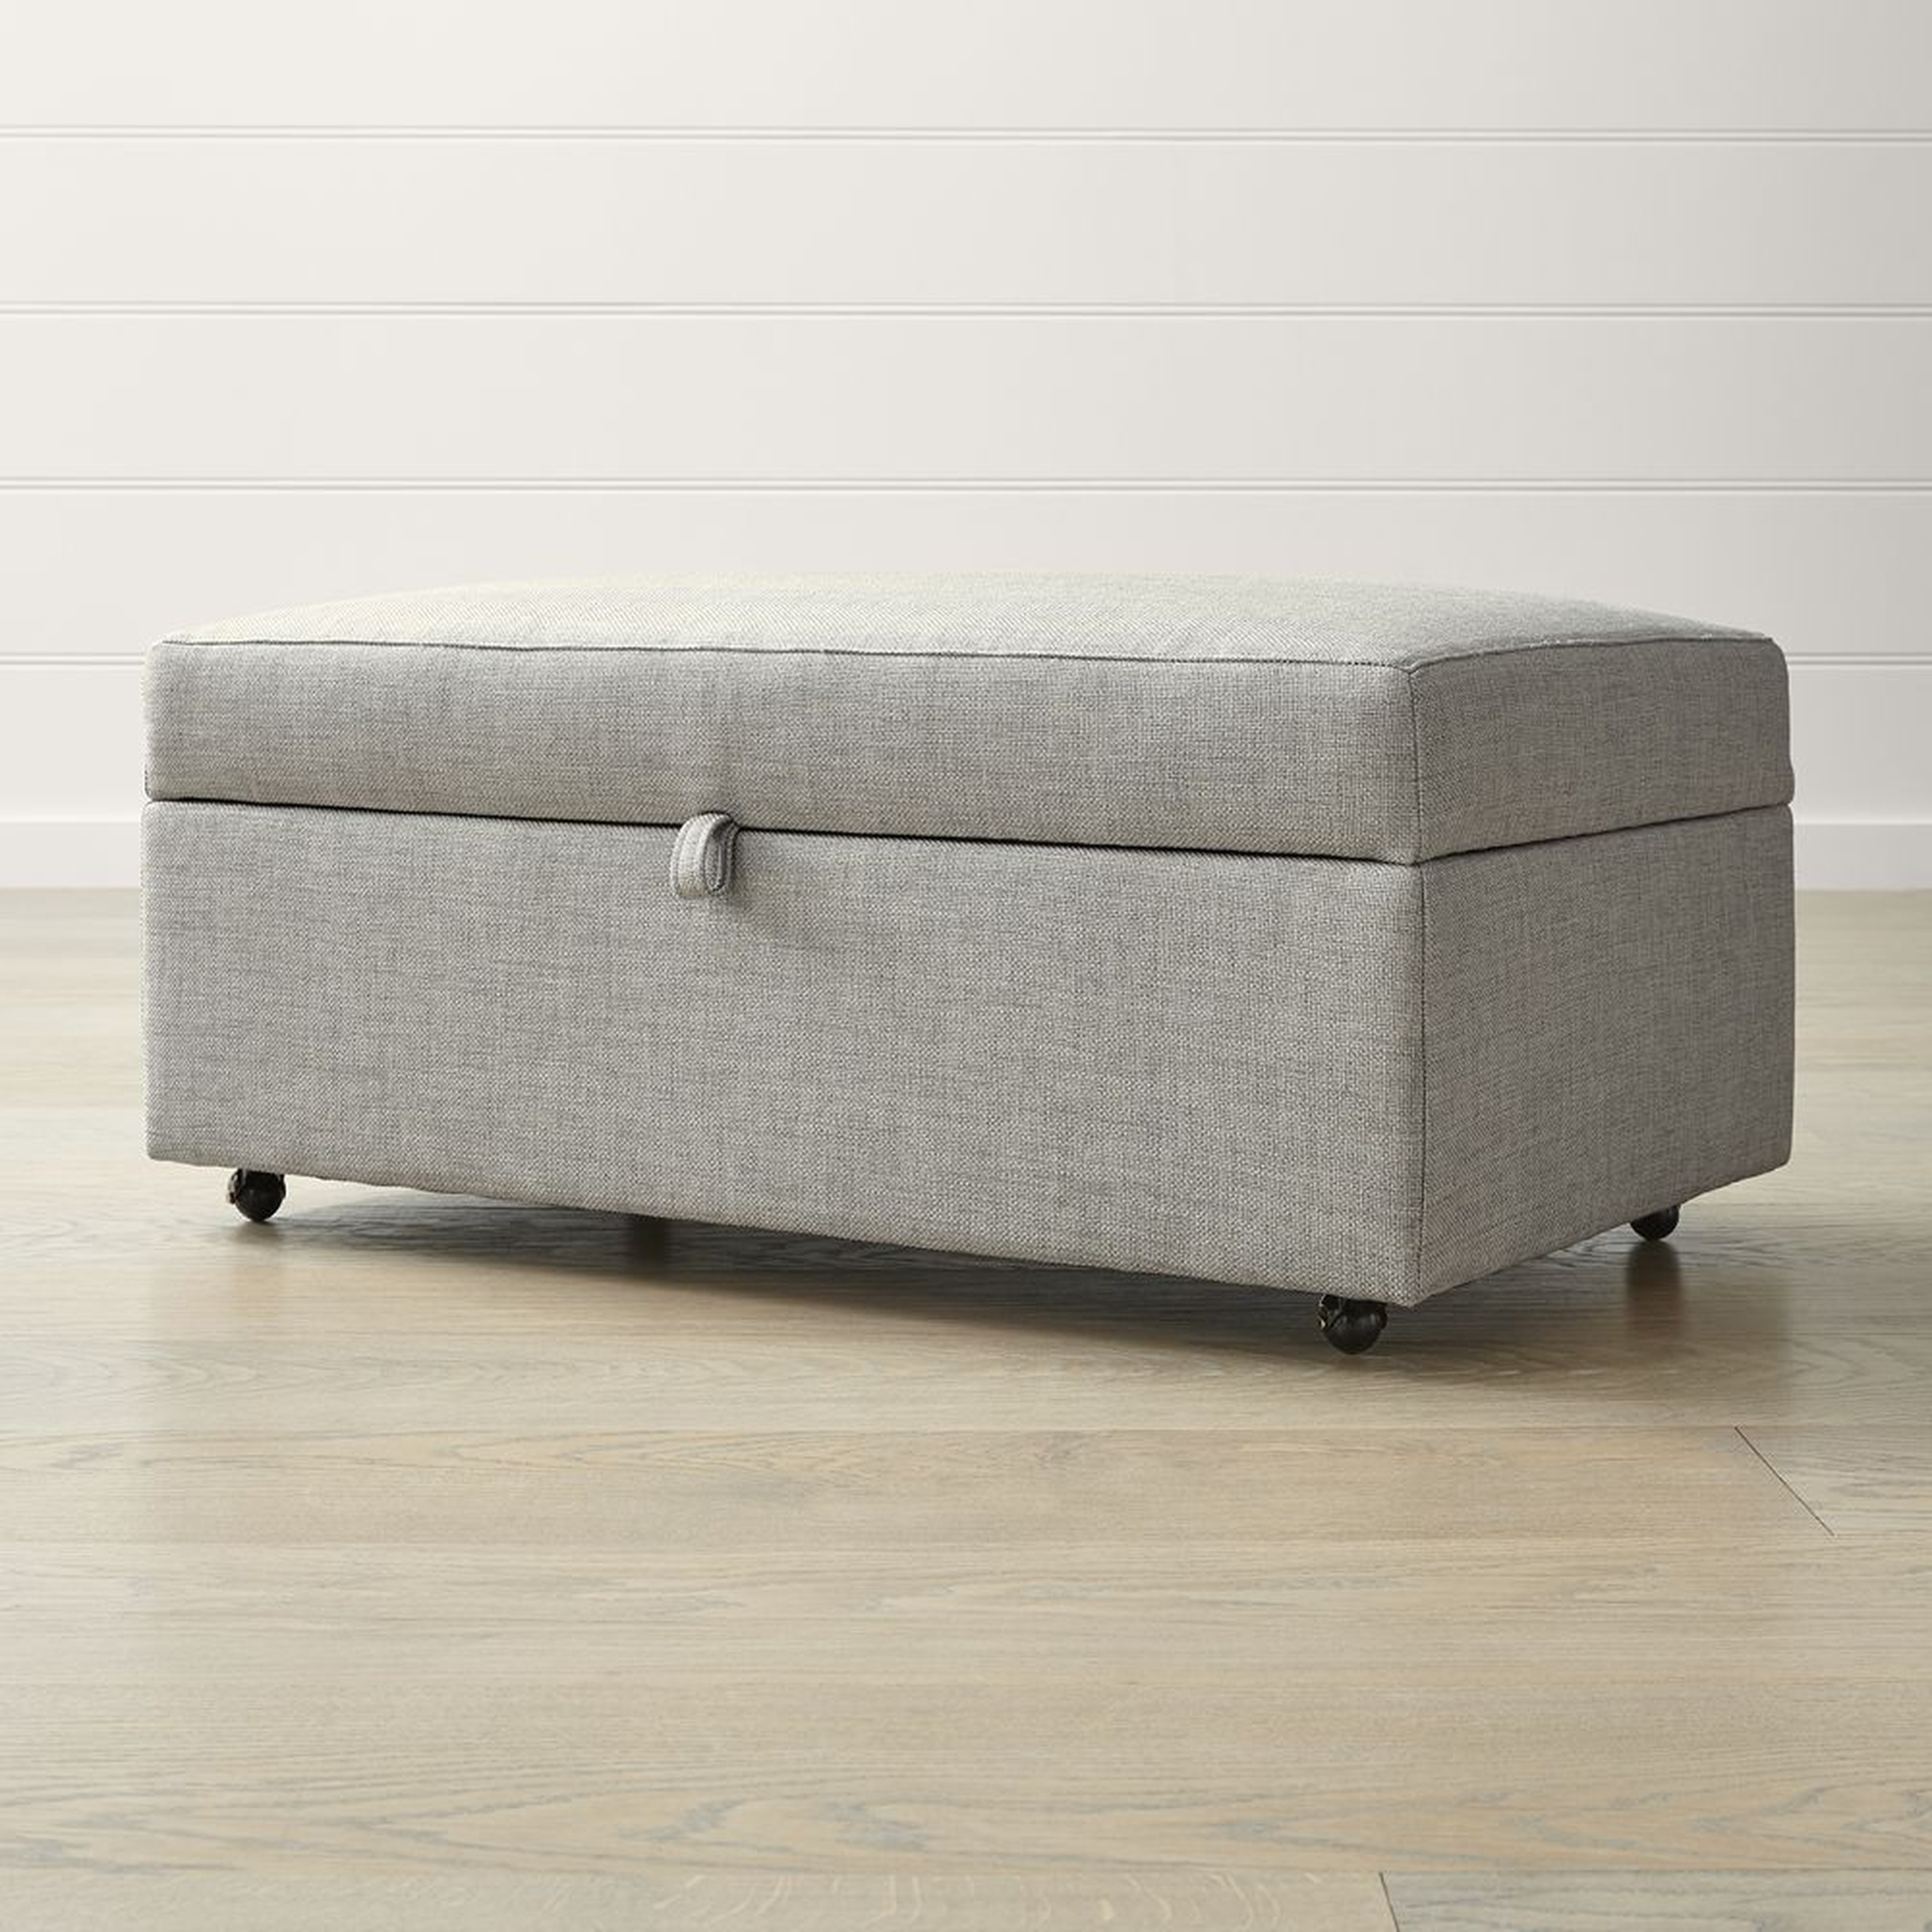 Barrett Storage Ottoman with Tray and Casters - Crate and Barrel